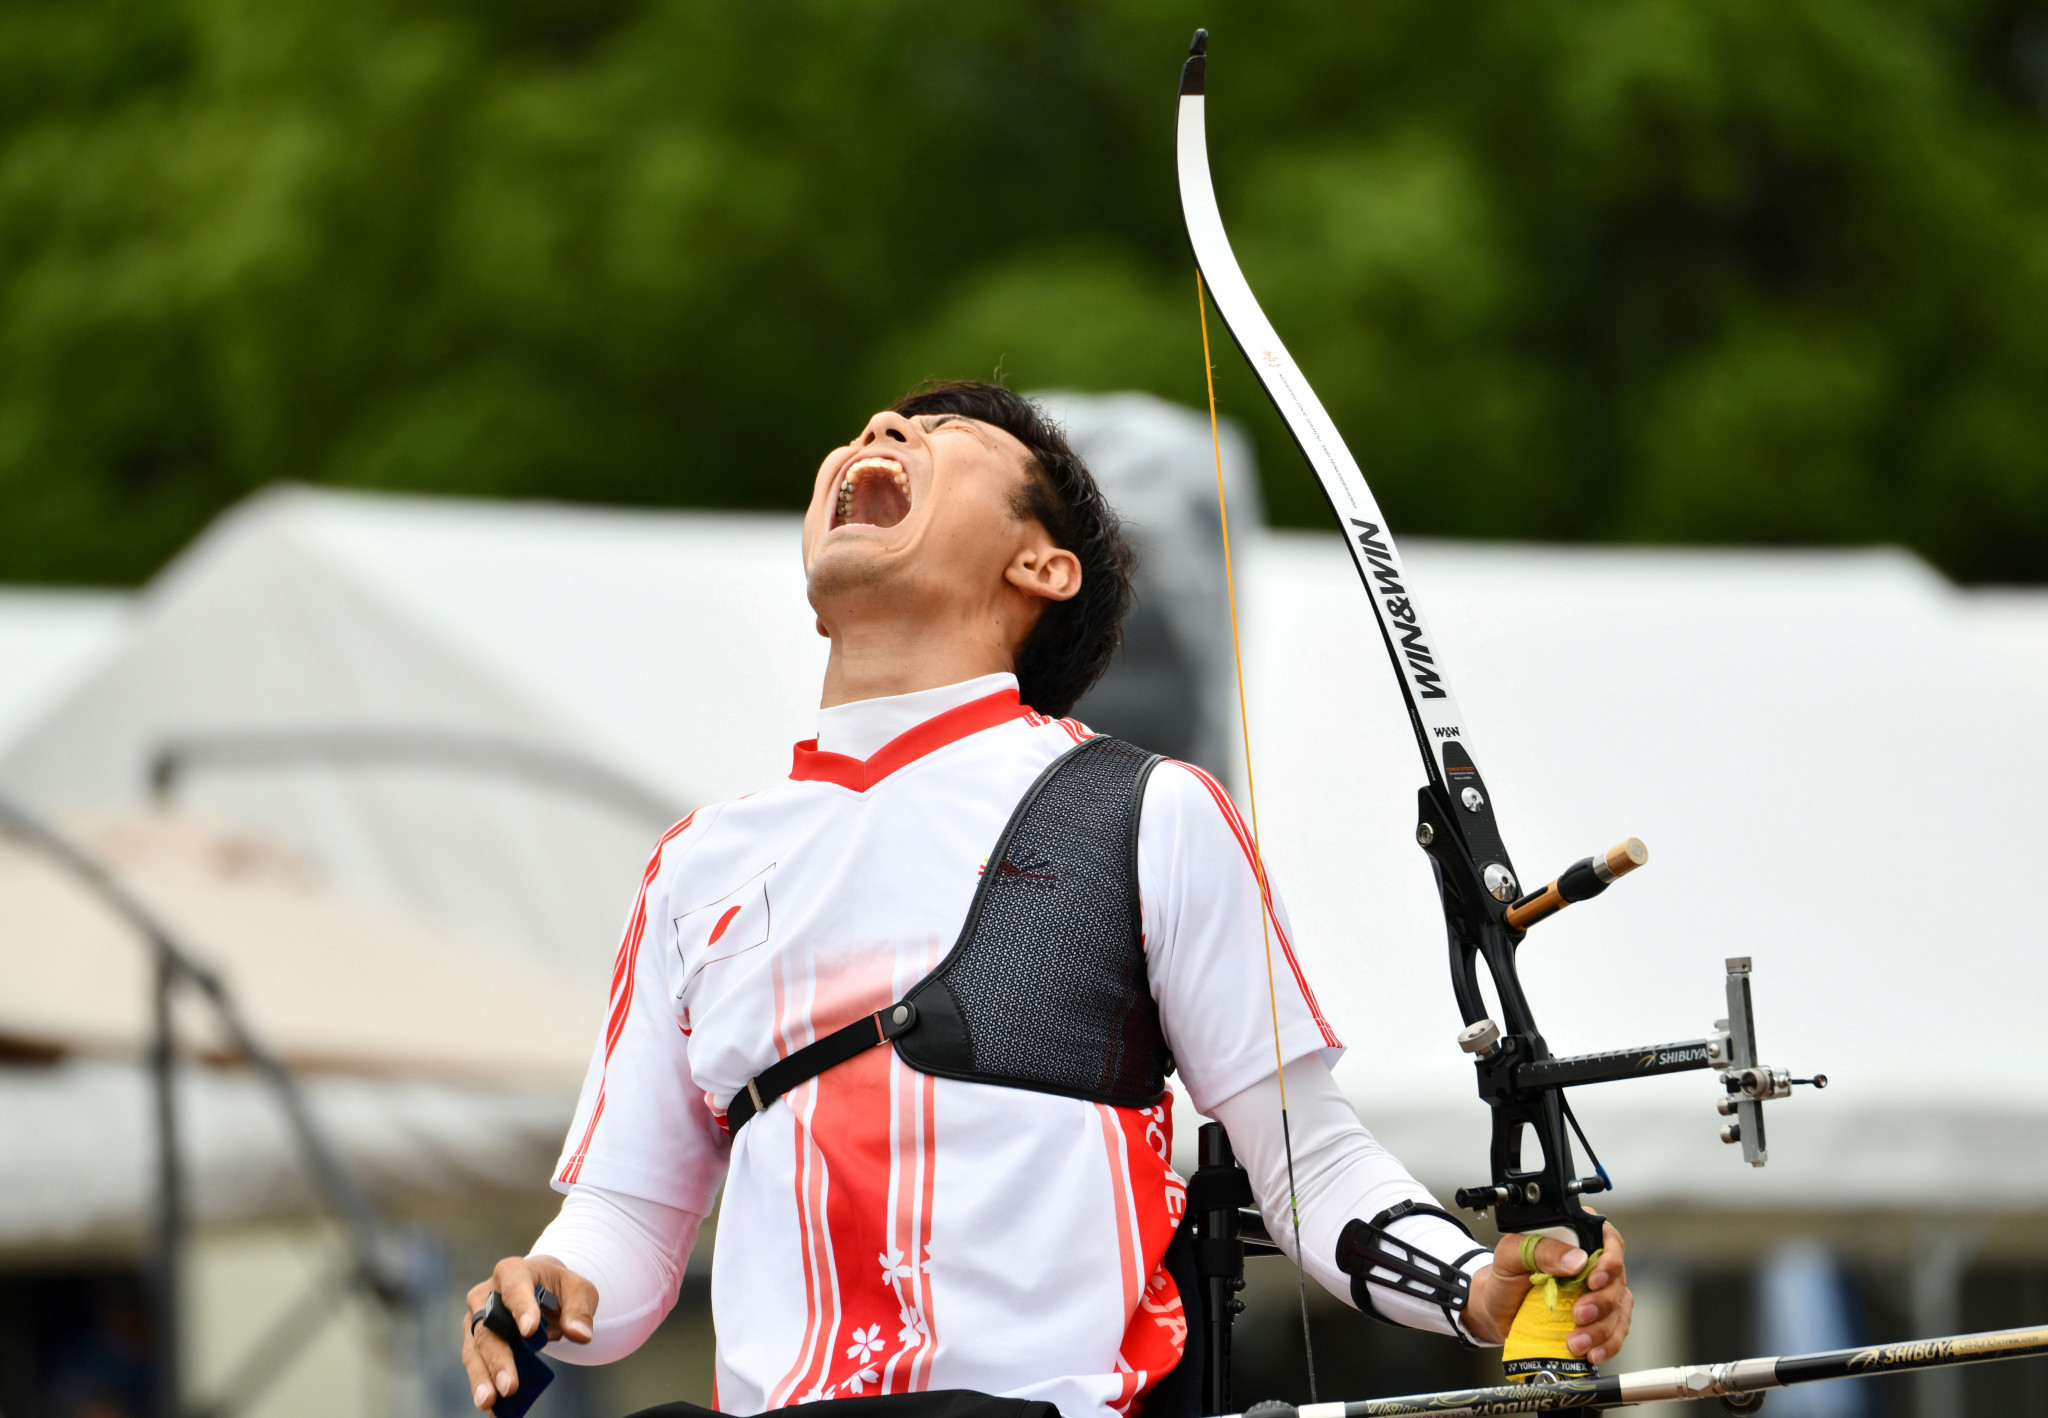 Japan's Tomohiro Ueyama came out on top in a shoot-off in the men's open recurve final at the World Archery Para Championships ©Getty Images